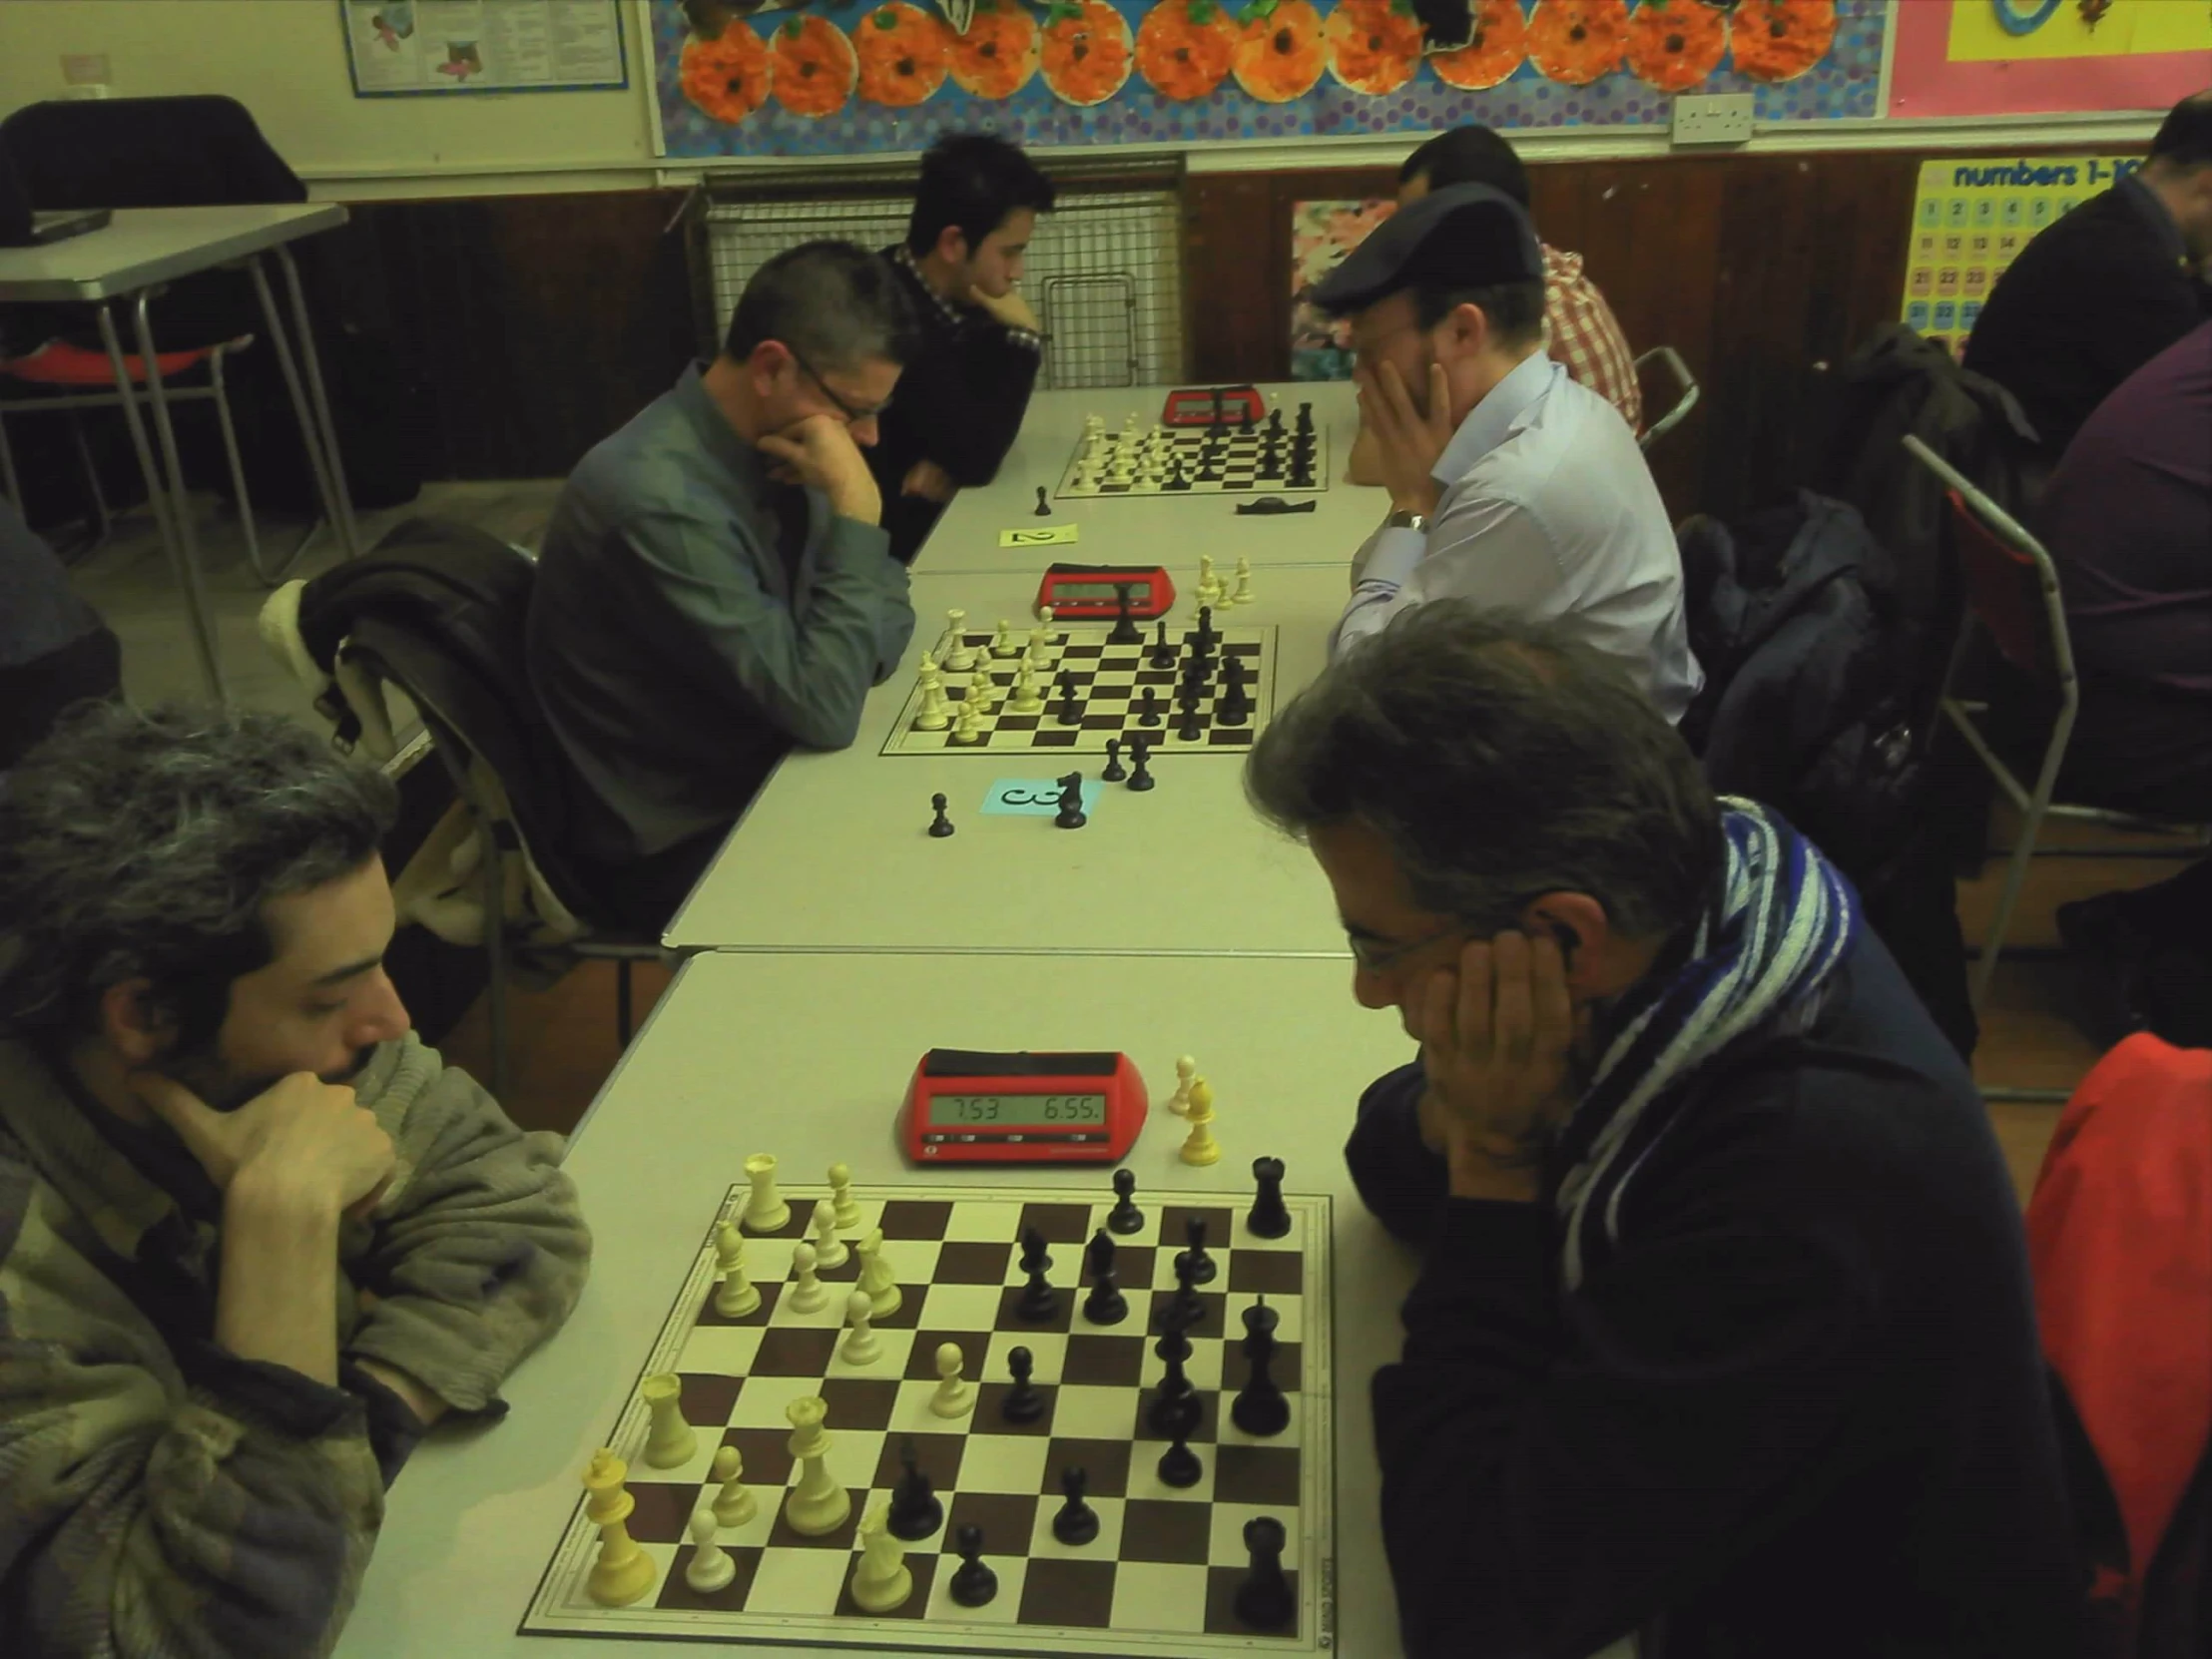 a group of people playing chess and check the board